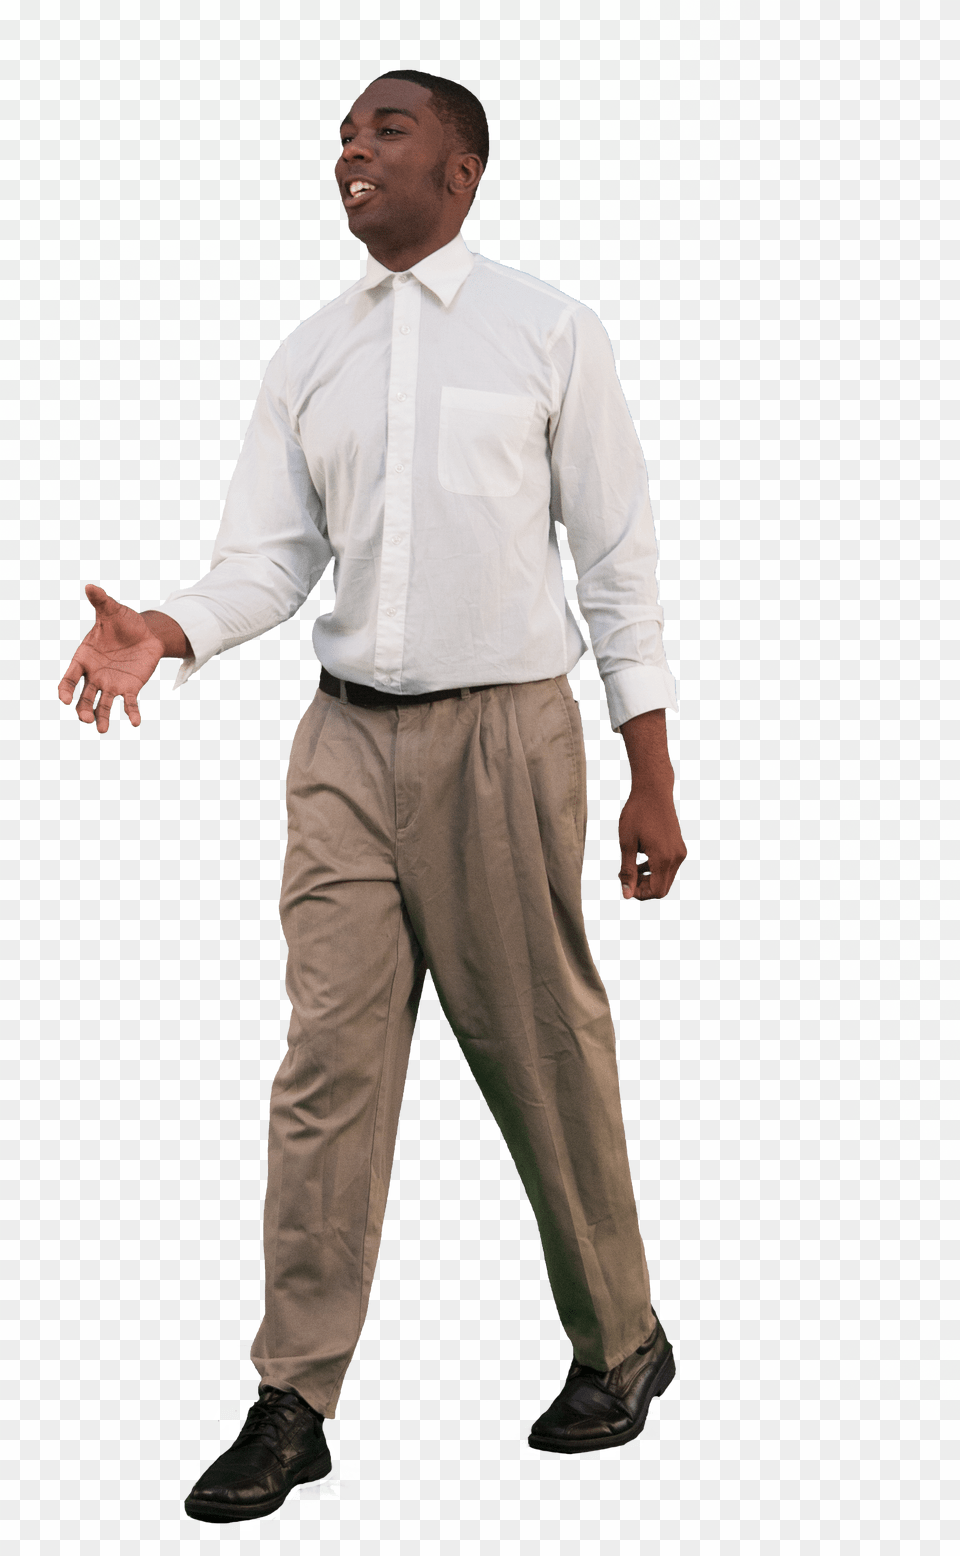 Standing, Male, Adult, Shirt, Man Png Image